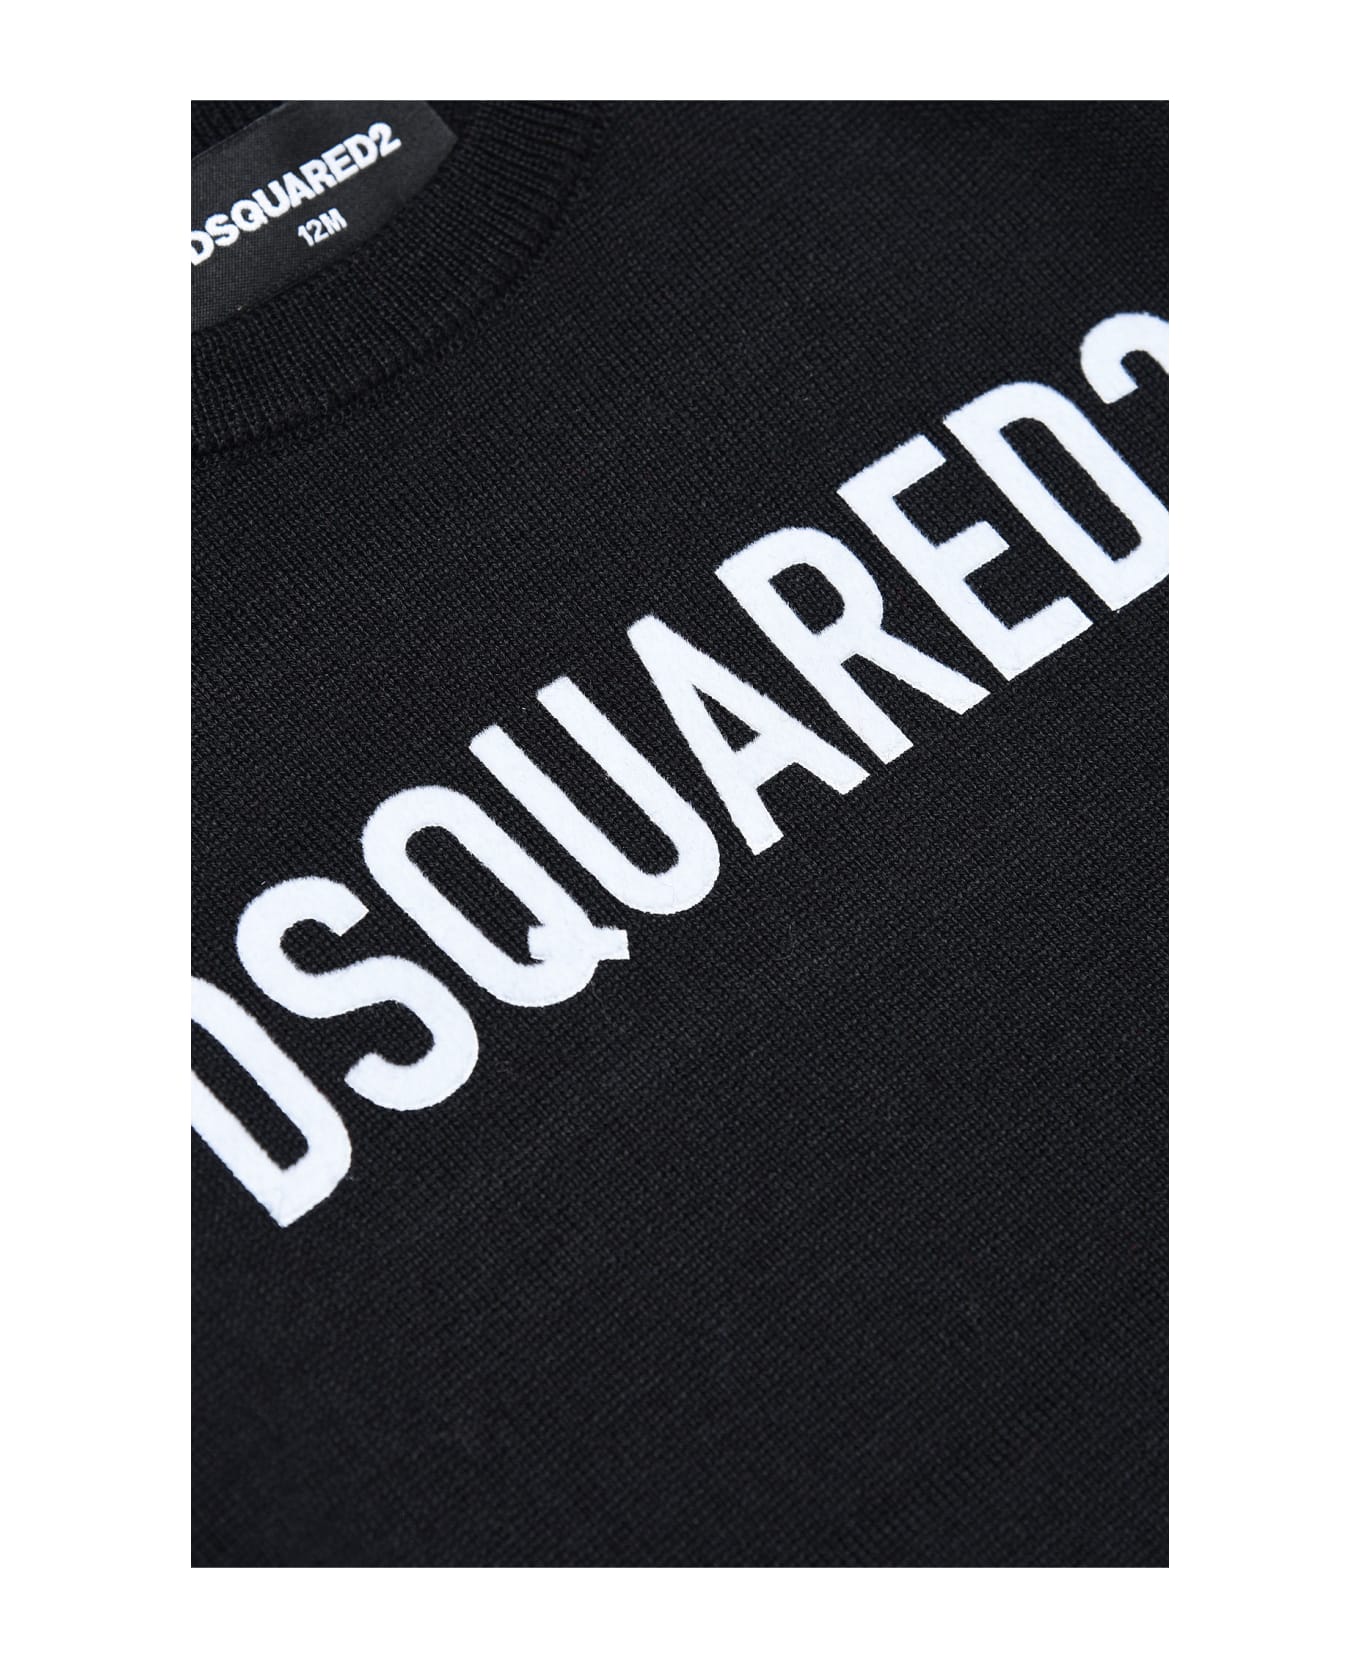 Dsquared2 Pull With Print - Black